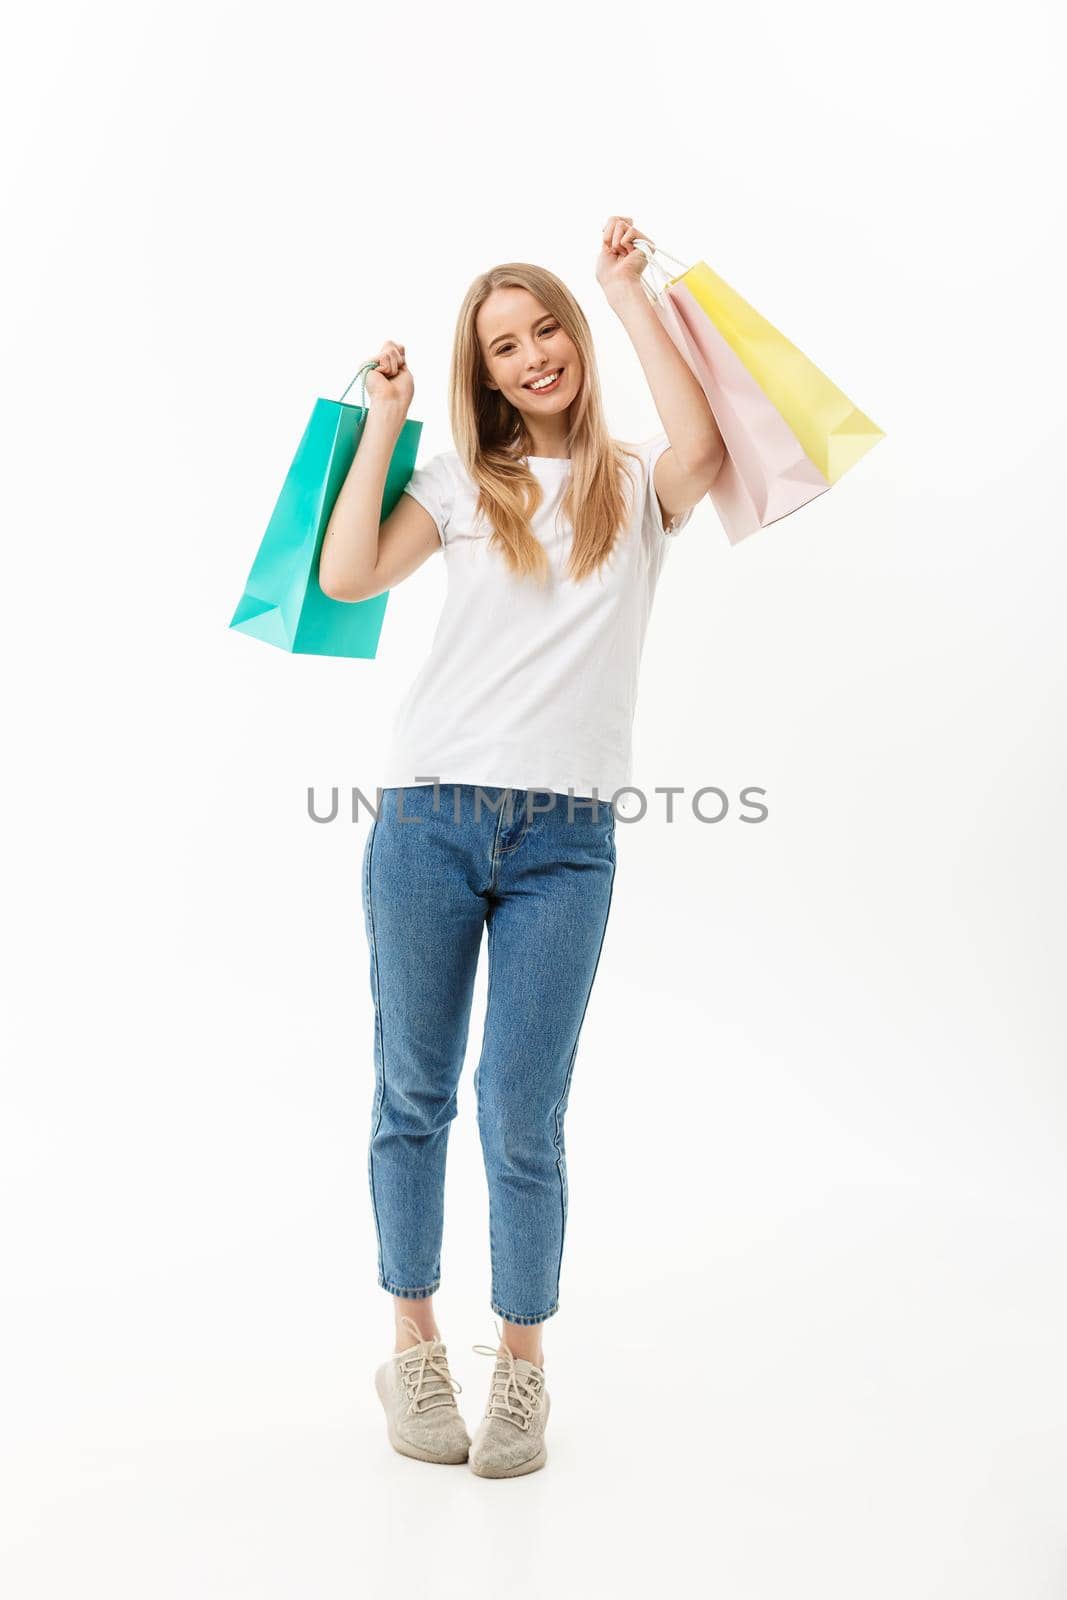 Full length portrait of a beautiful young woman posing with shopping bags, isolated on white background.